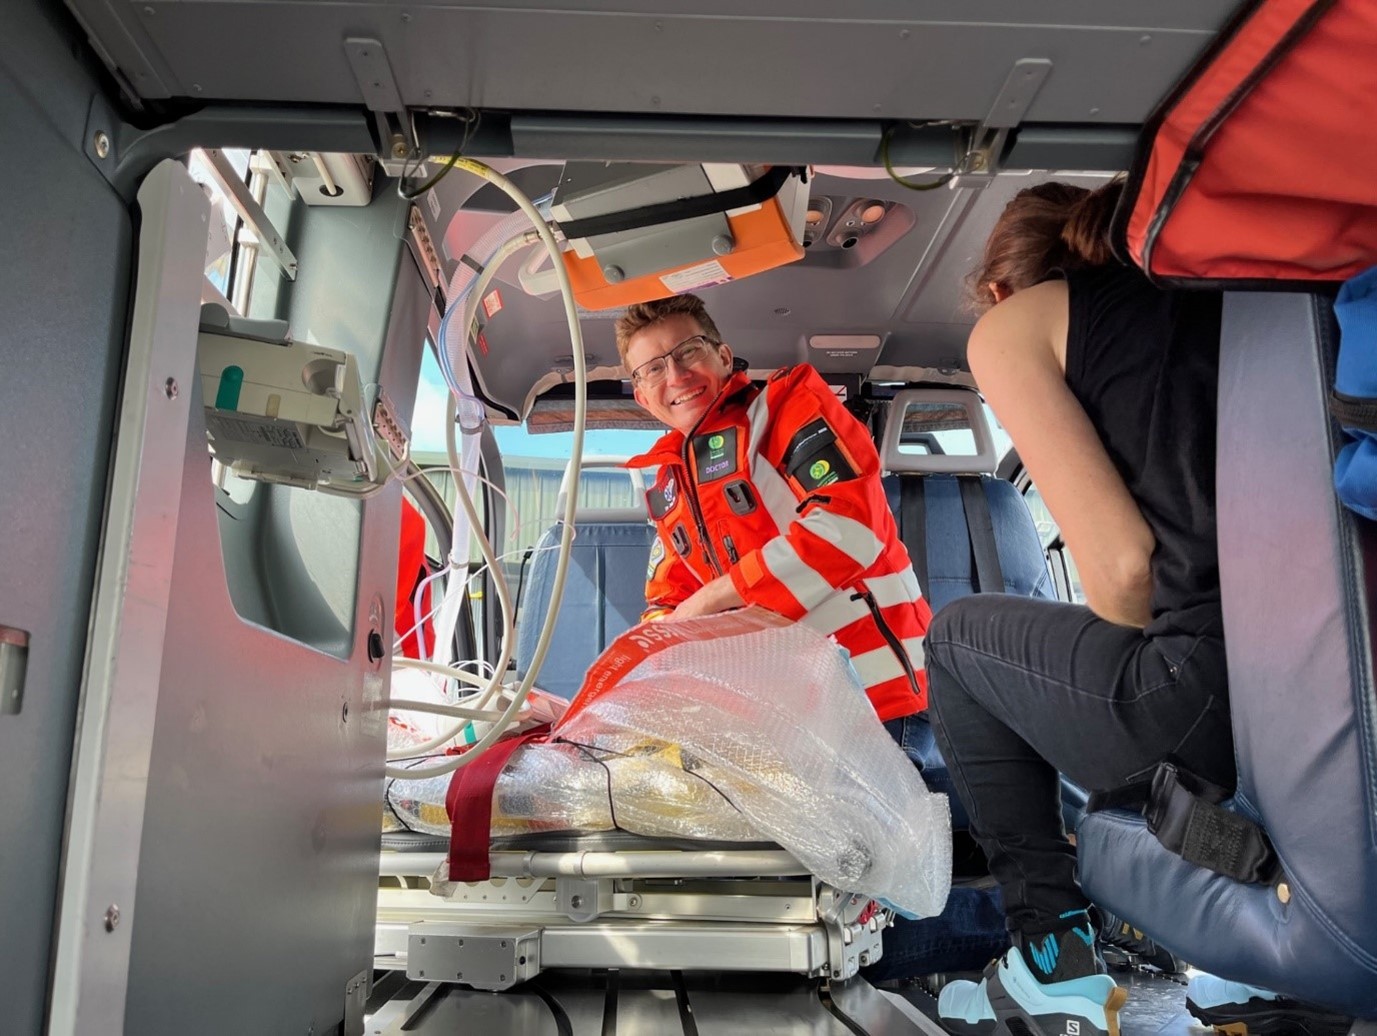 A doctor crouched inside the back of a helicopter